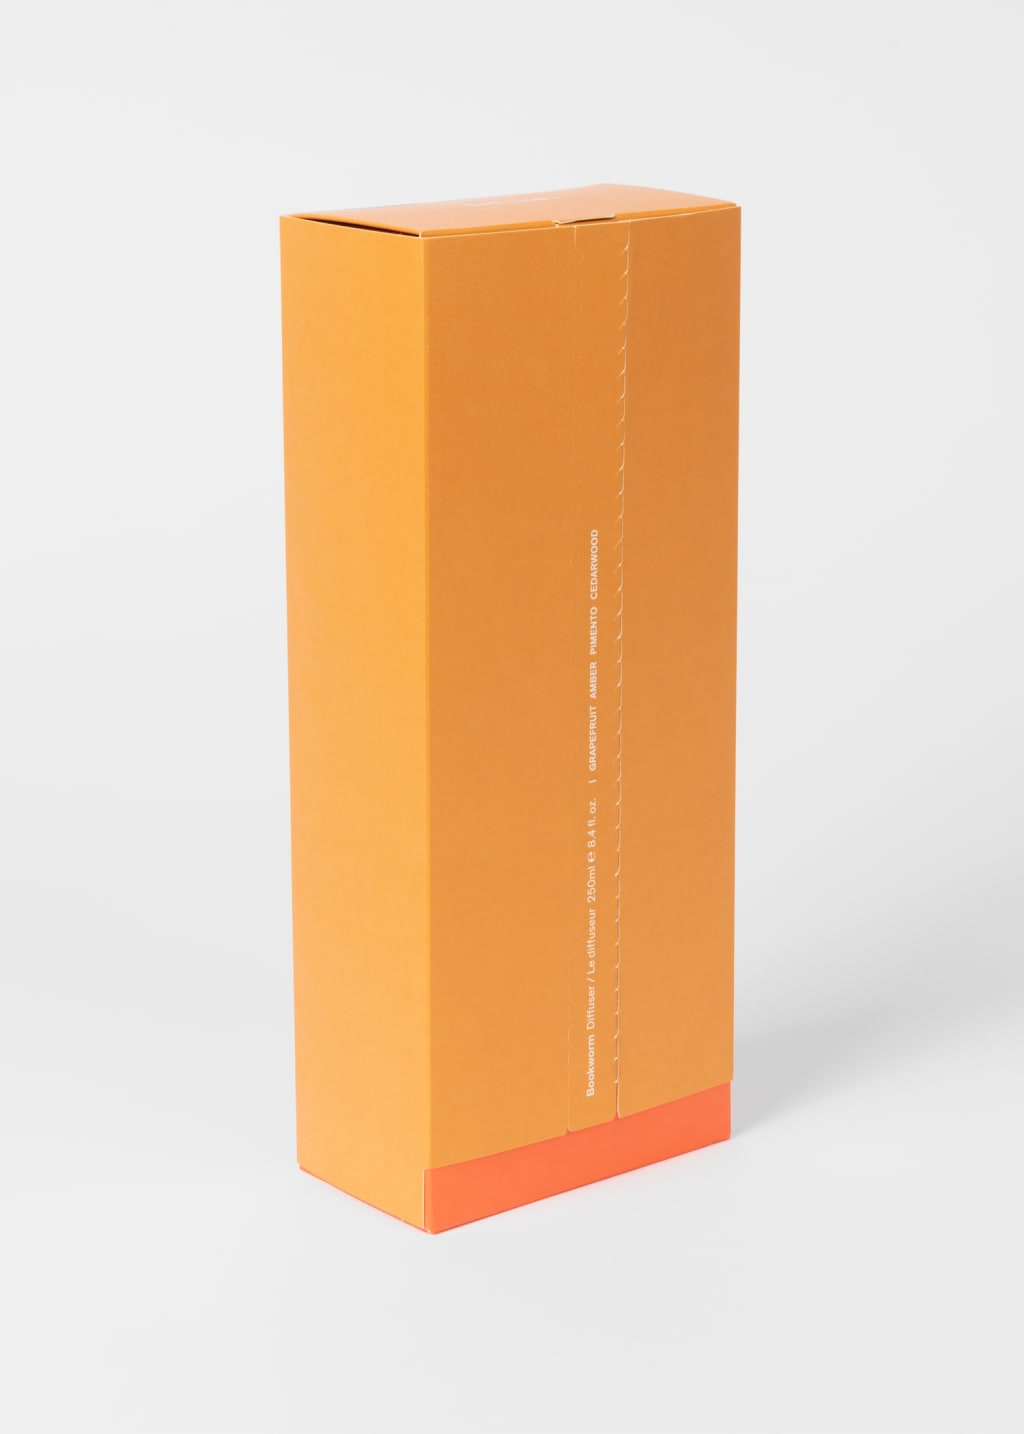 Product View - Paul Smith Bookworm Diffuser, 250ml Paul Smith